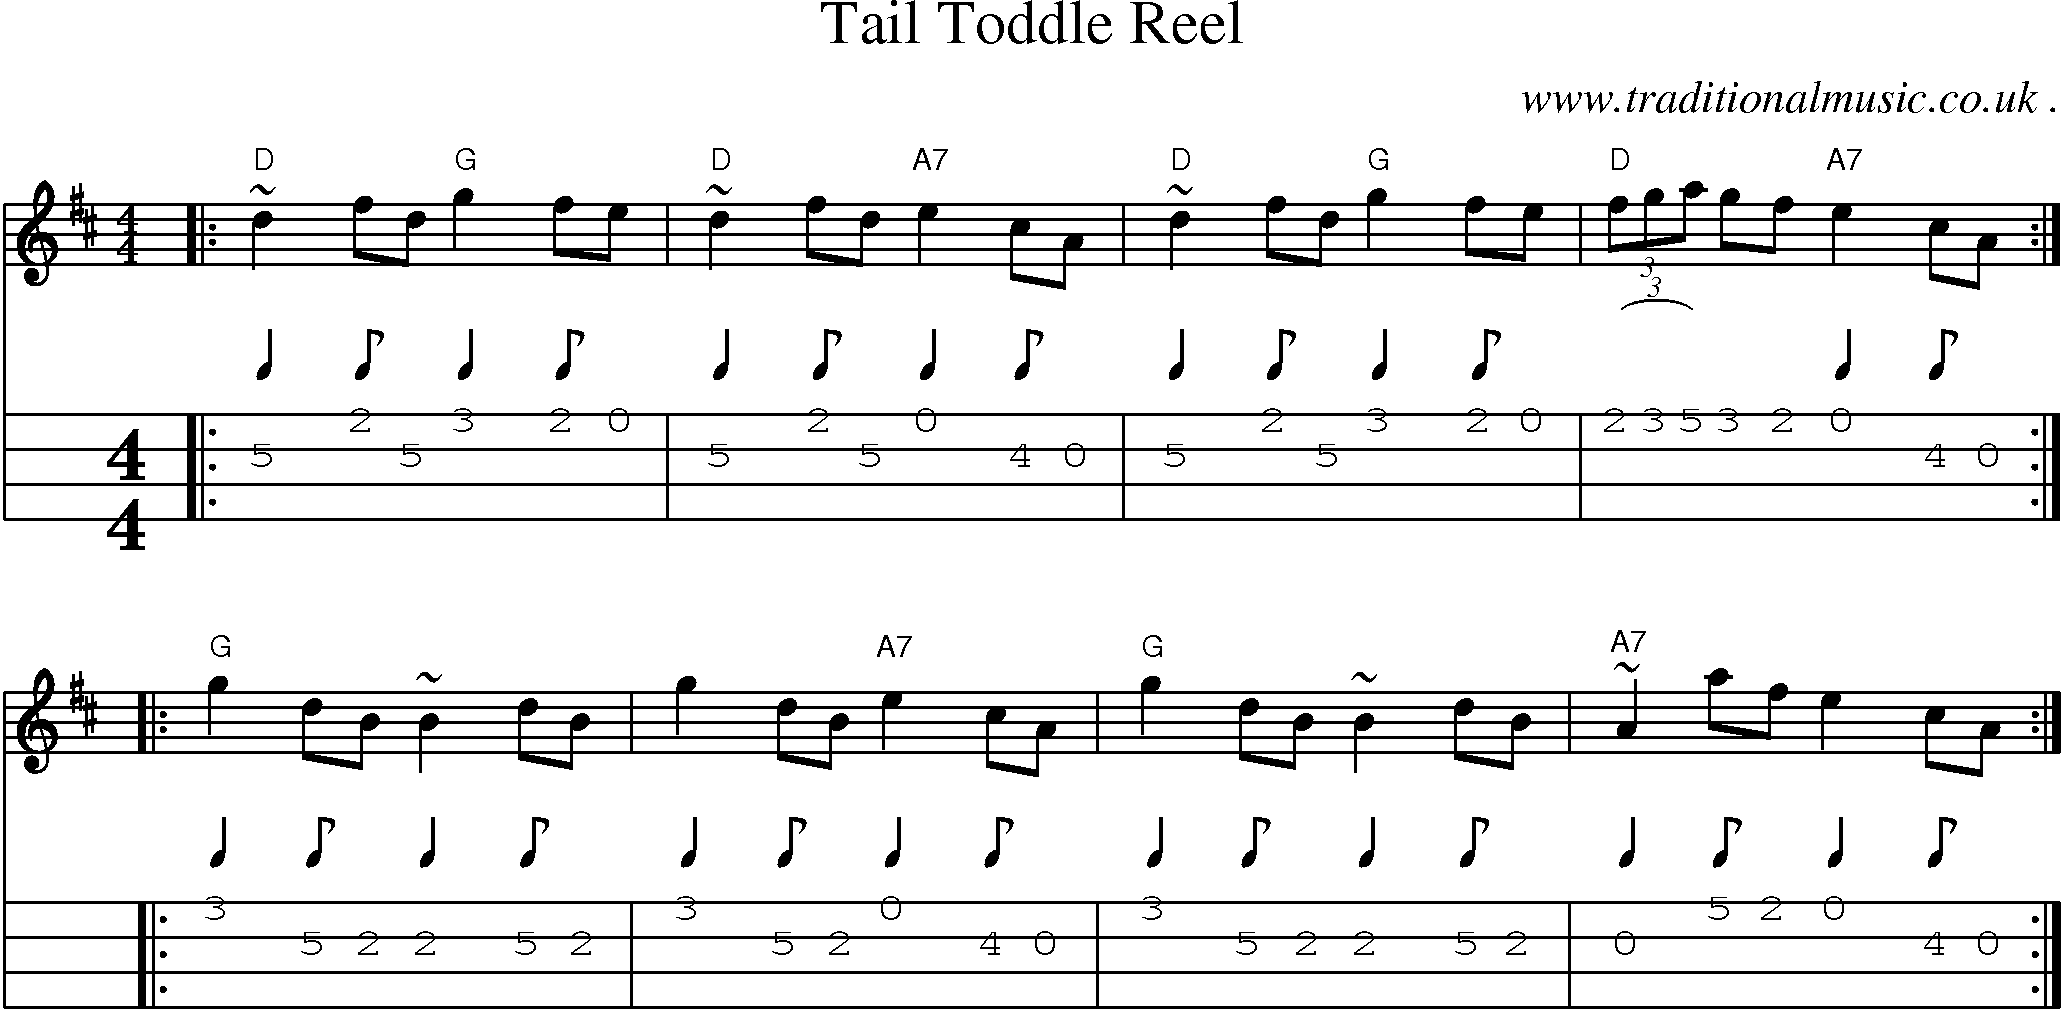 Sheet-music  score, Chords and Mandolin Tabs for Tail Toddle Reel